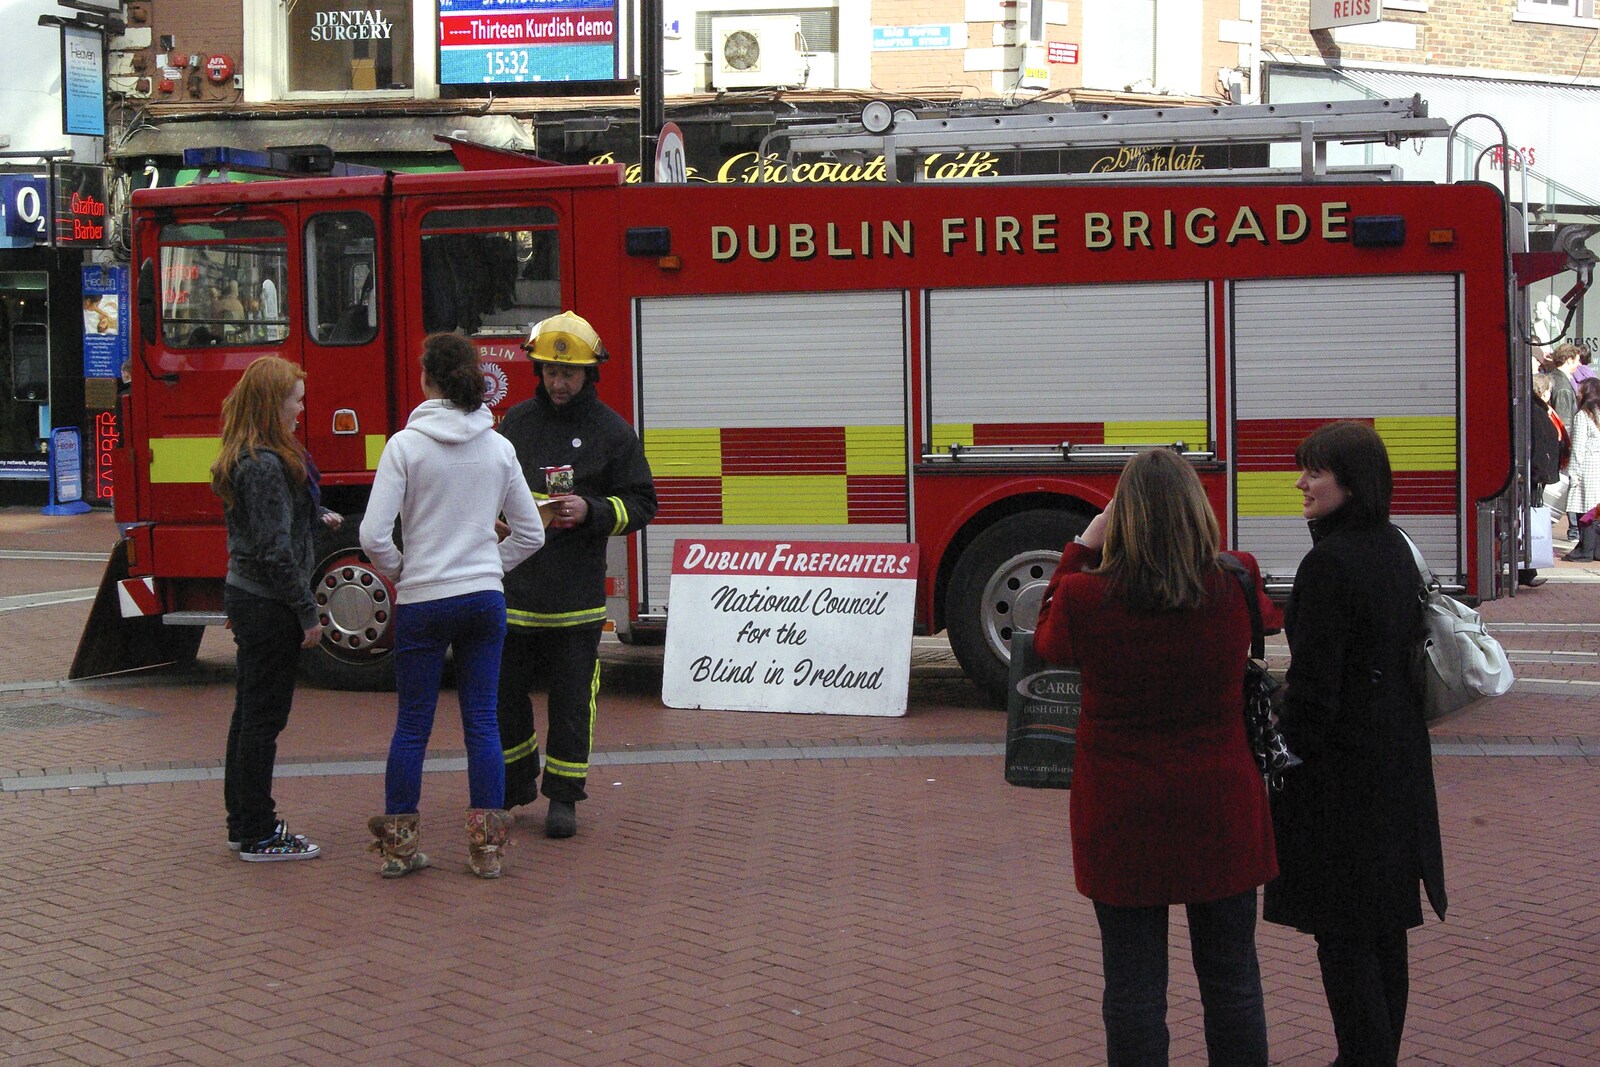 The Dublin Fire Brigade engine from Easter in Dublin, Ireland - 21st March 2008